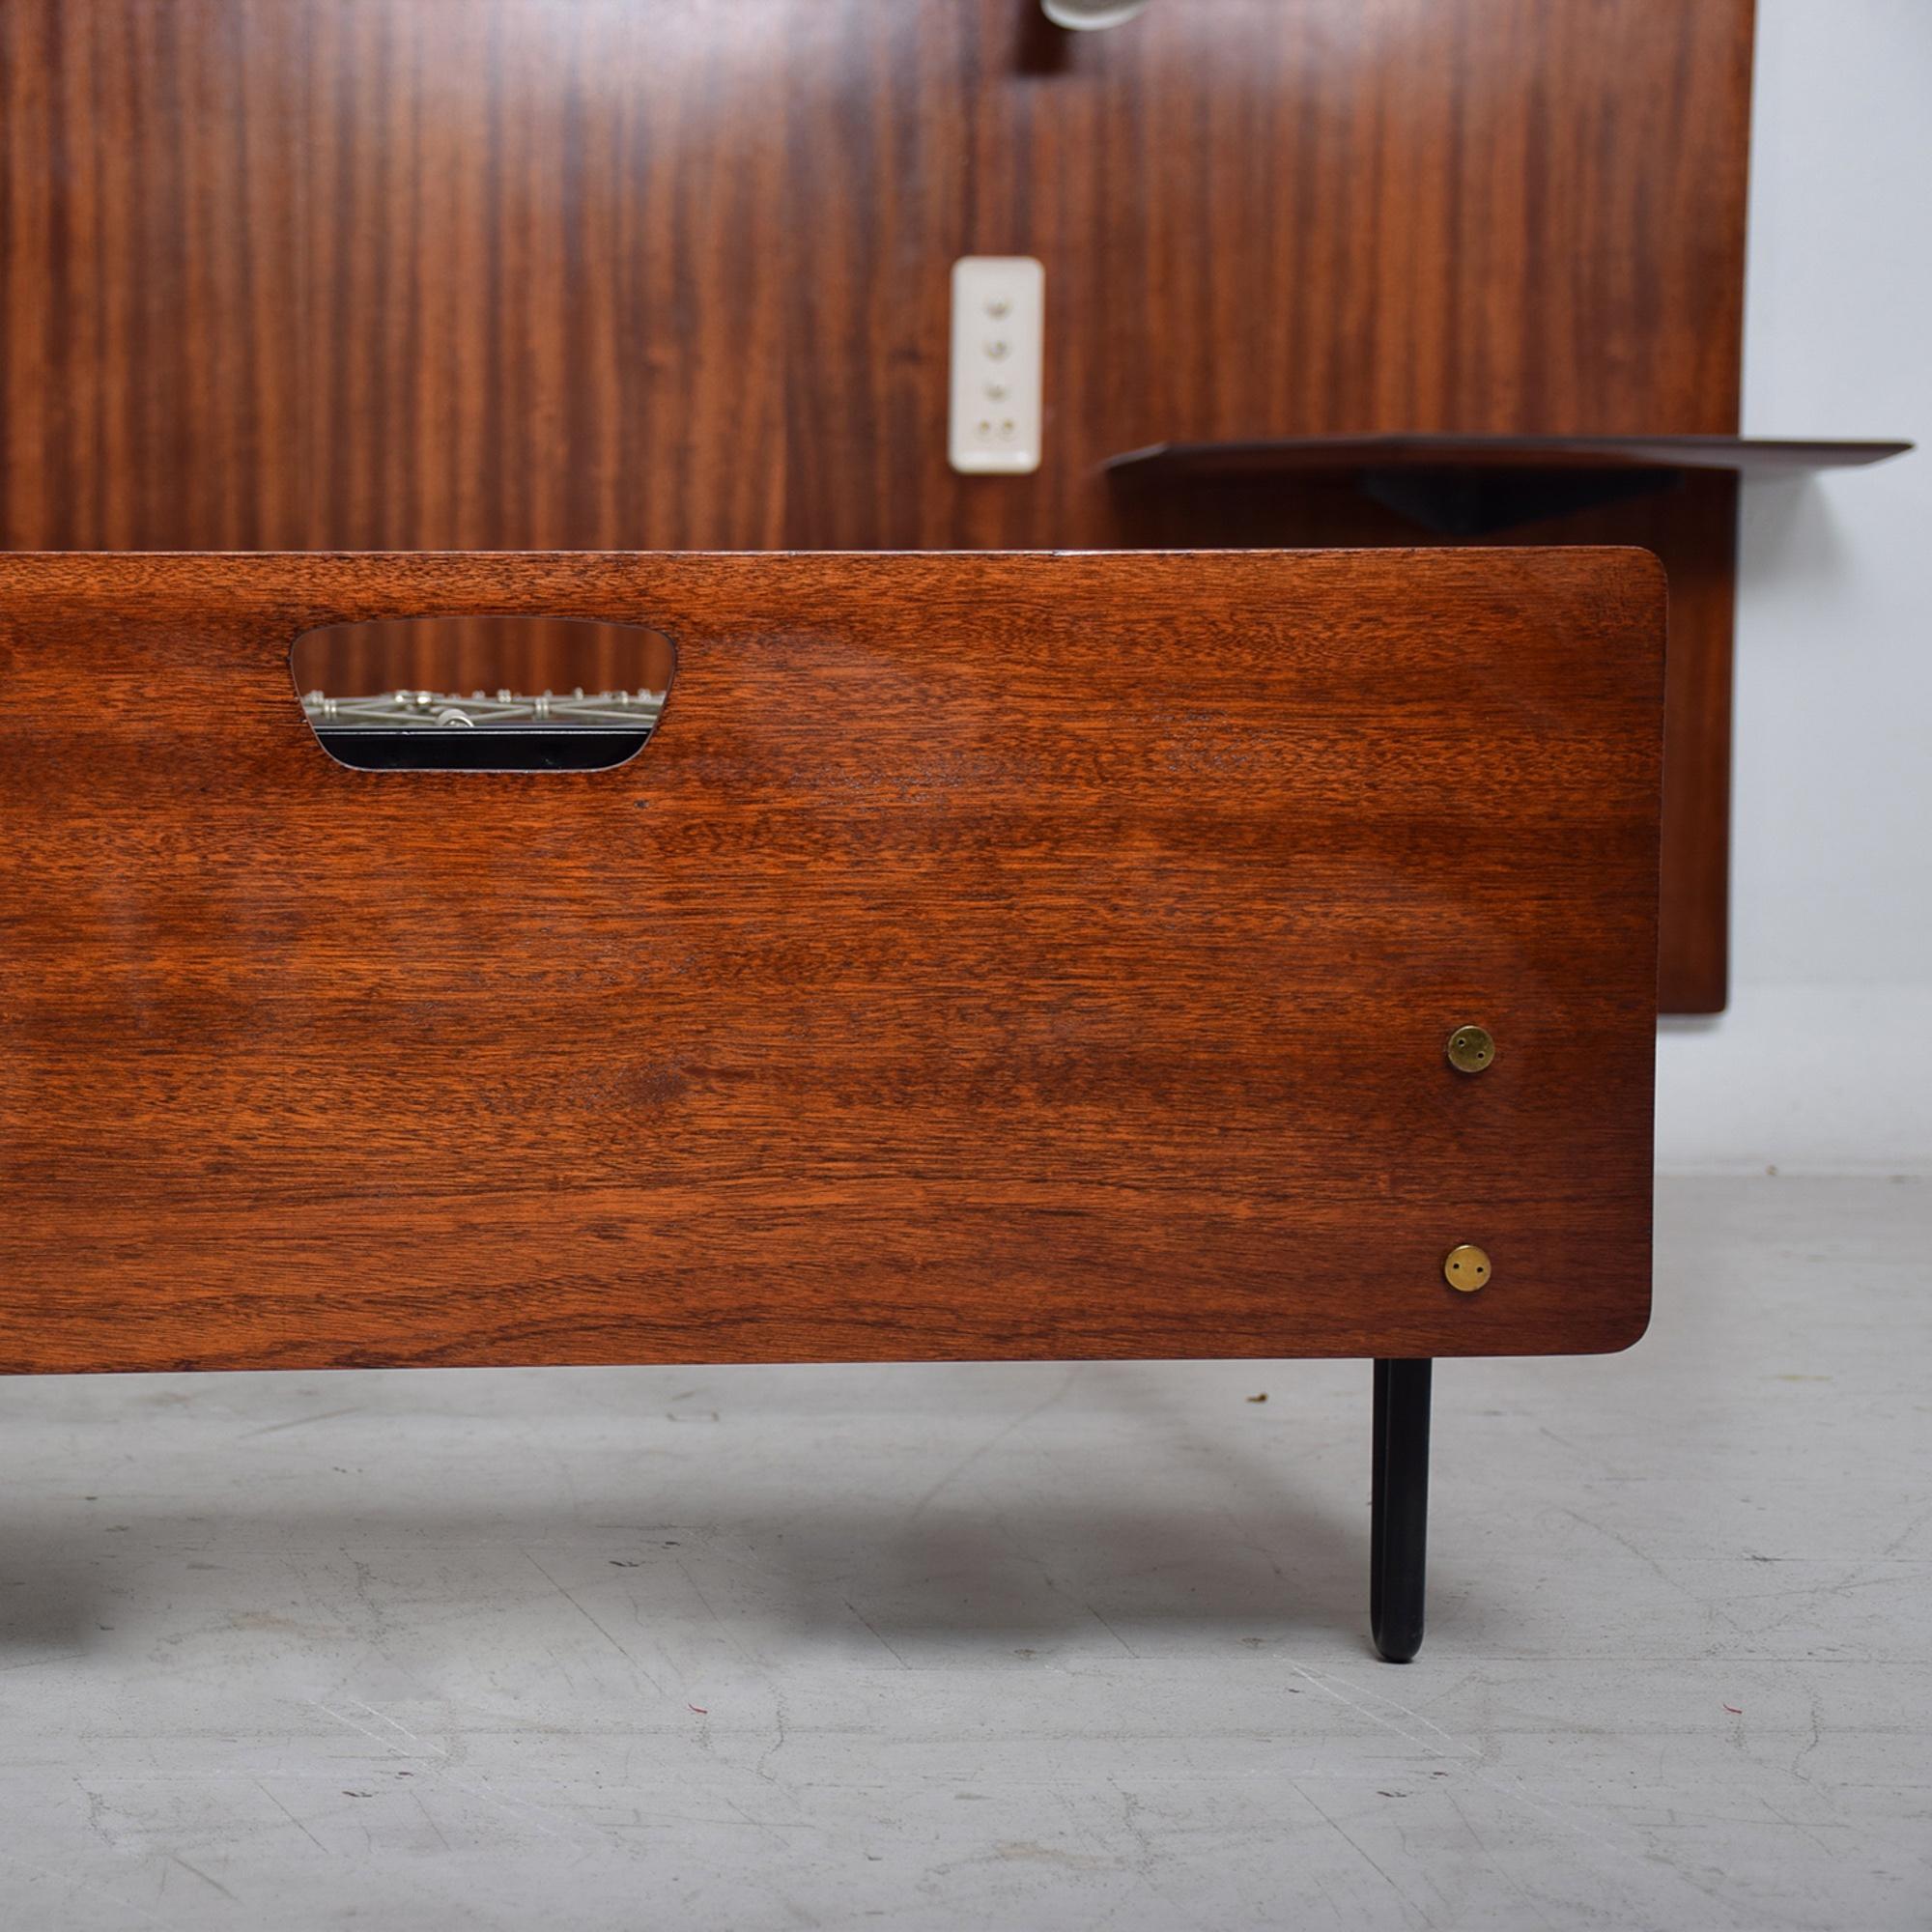 Dreamy Mid-Century Modern bed made in Italy. Acquired from an apartment in Milan where the design of said apartment was done by Osvaldo Borsani. (however, there is no documentation provided).
The headboard splits into two sections and it is hung